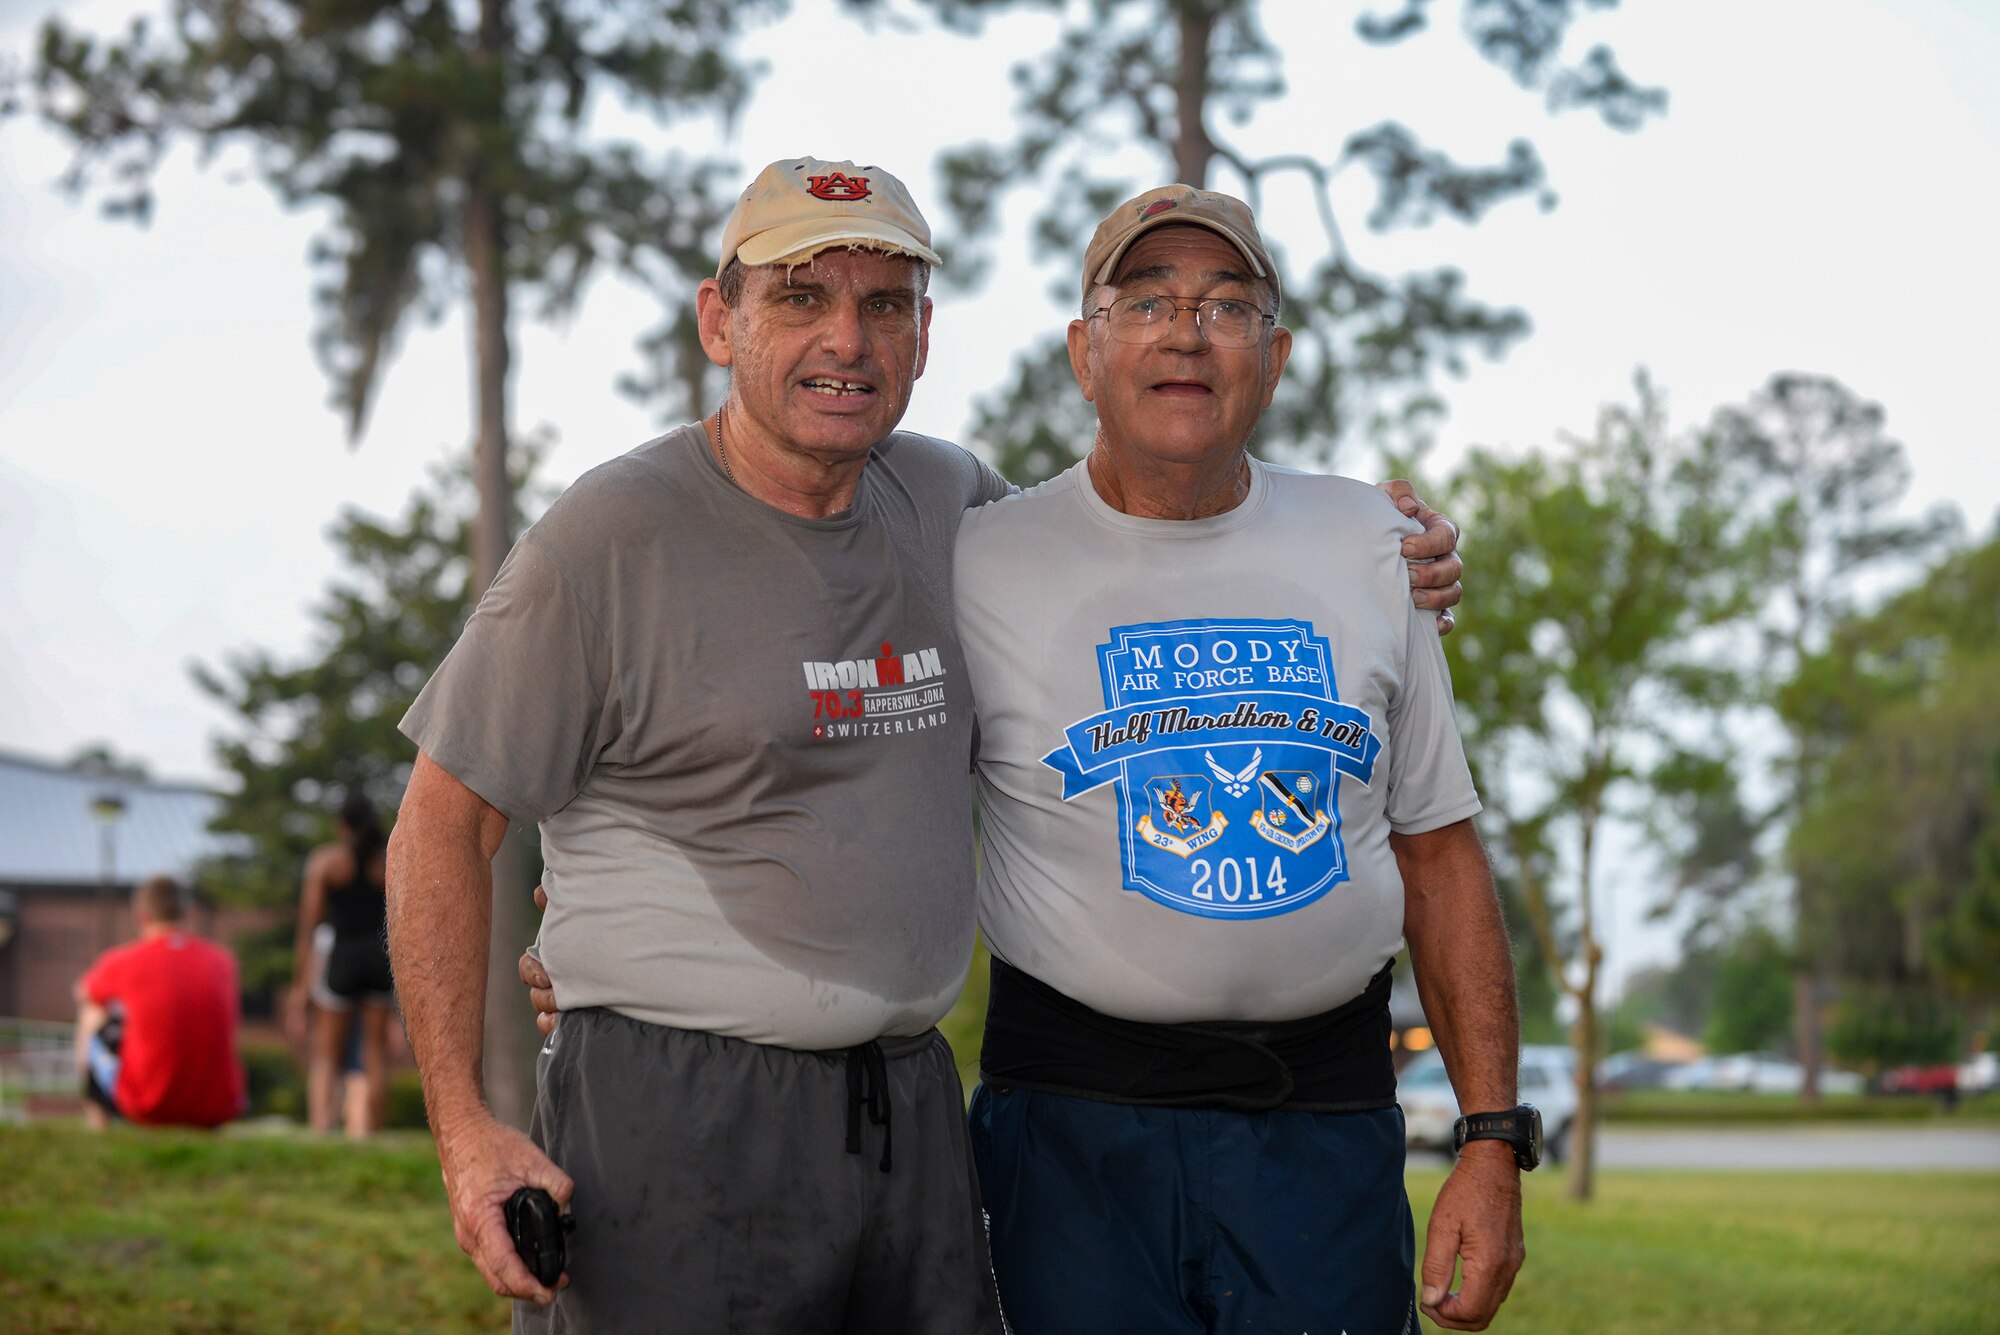 Retired U.S. Air Force Capt. Steve Coin, left, and retired Master Sgt. Joe Christian, pose for a photo following the April Fool’s 5k April 1, 2015, at Moody AFB, Ga. This was Christian’s 1,080th race. (U.S. Air Force photo by Senior Airman Sandra Marrero/Released)